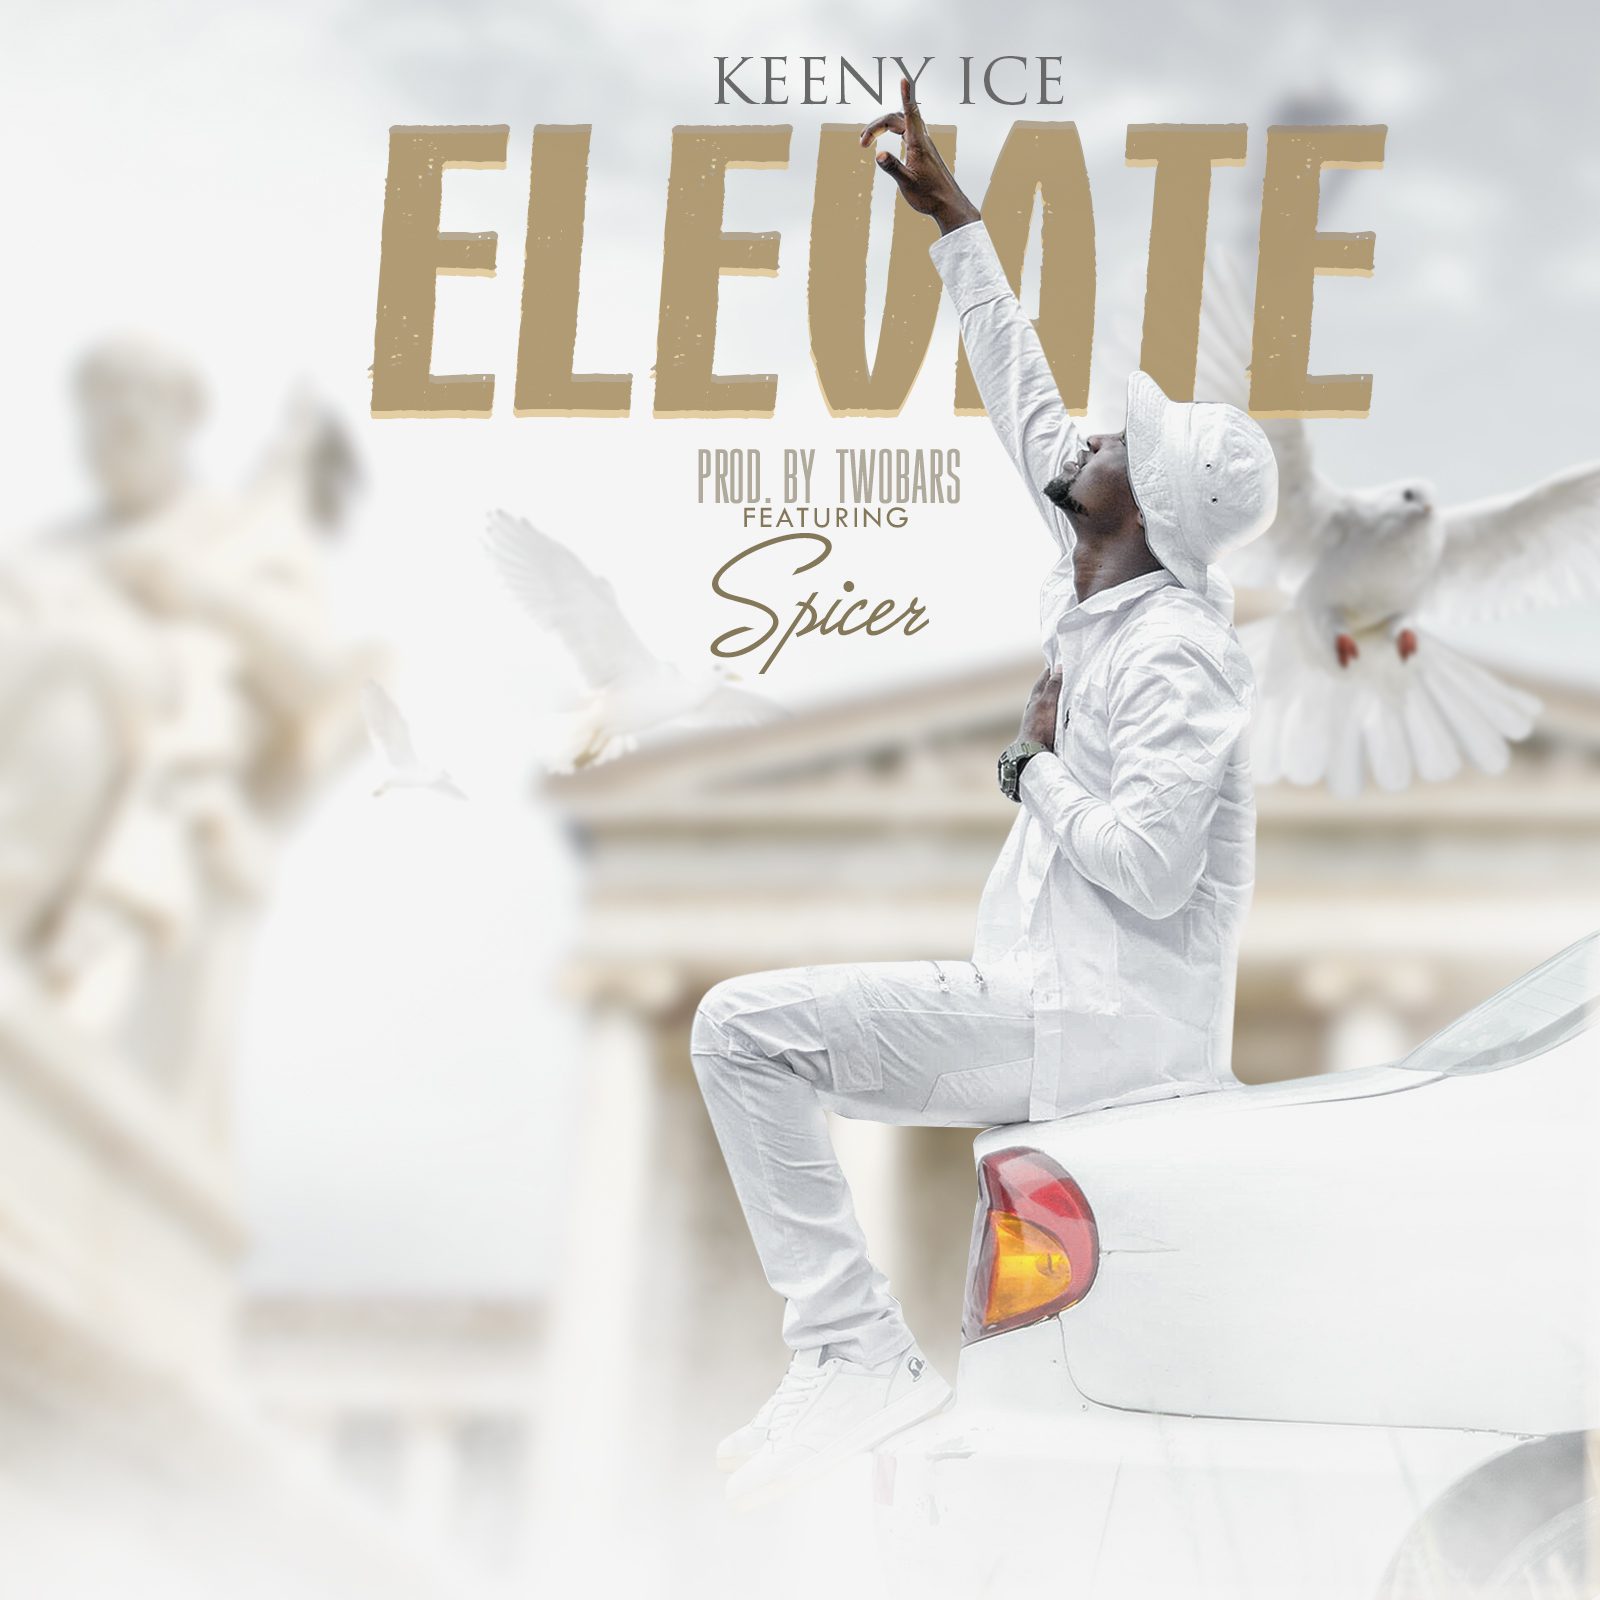 Keeny Ice ft Spicer – Elevate (Prod by Two Bars)